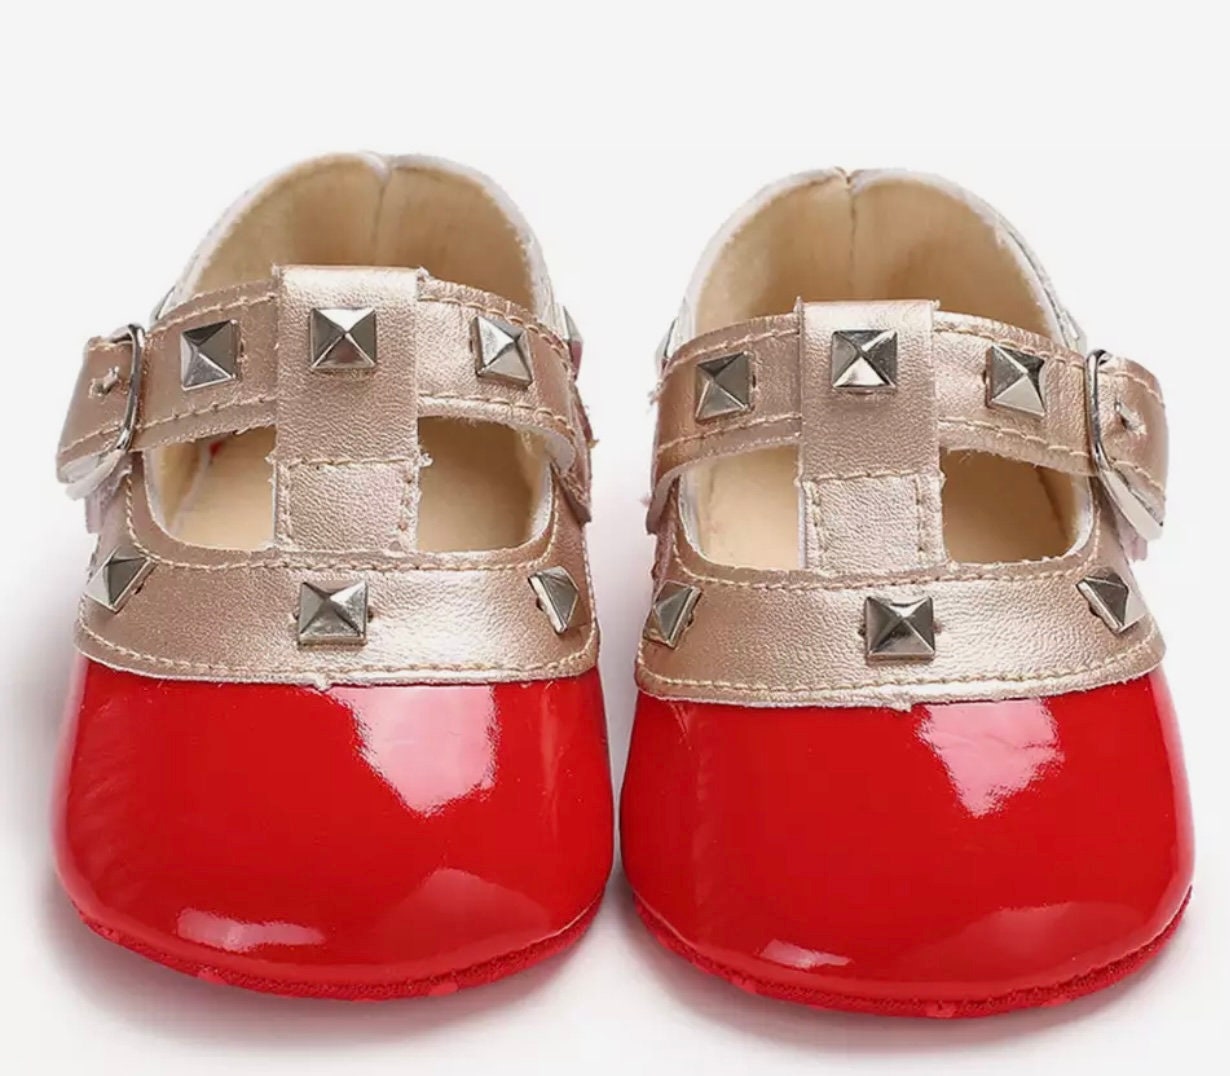 Adorable Baby Girl Shoes Crib Shoes Designer Studied Shoe 